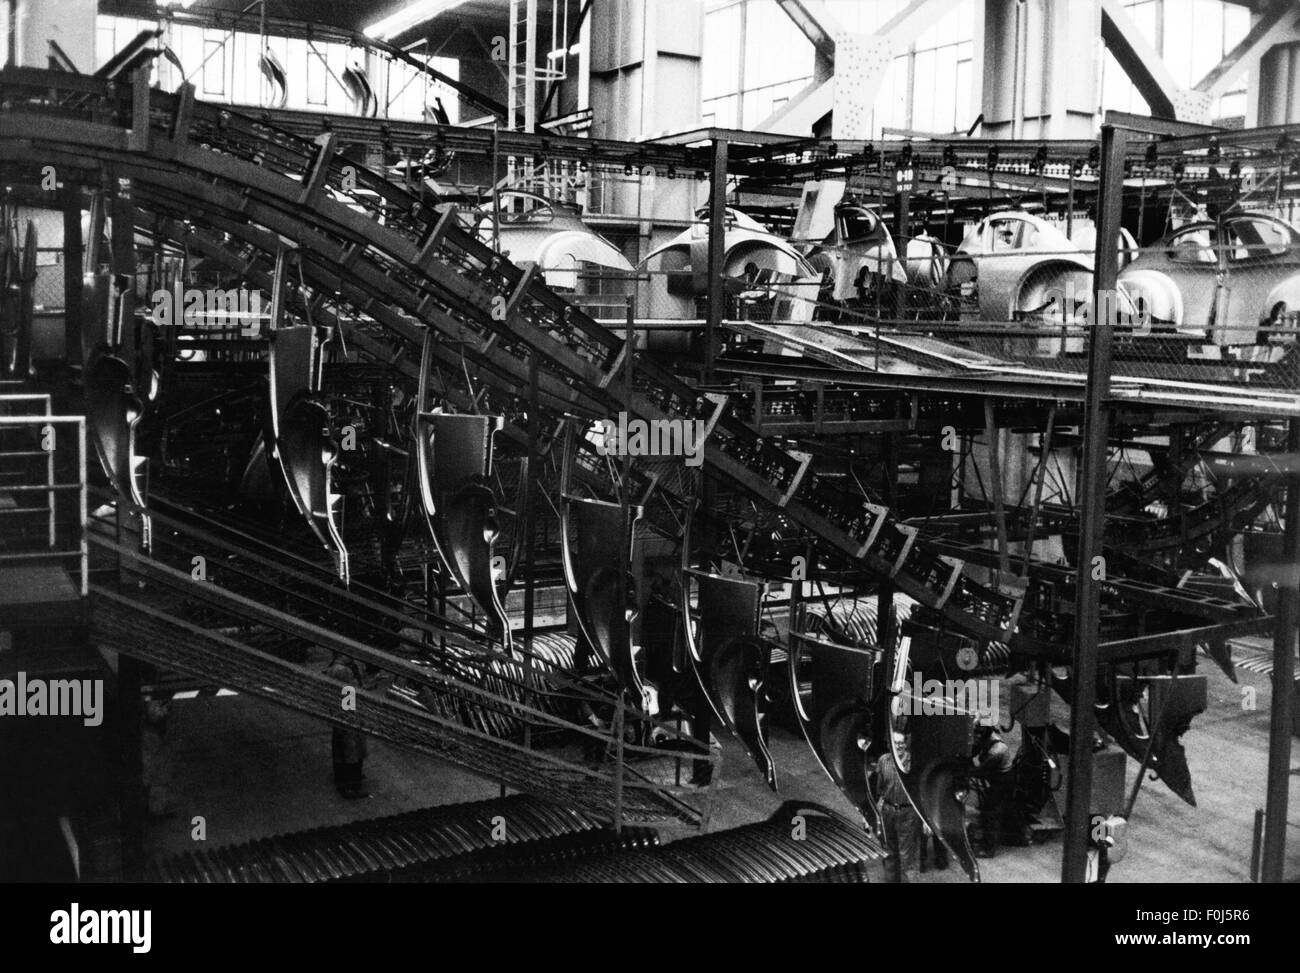 industry, car industry, Volkswagen, Volkswagen plant Wolfsburg, interior view, transport of parts for VW Beetle 1300, 1960s, Additional-Rights-Clearences-Not Available Stock Photo